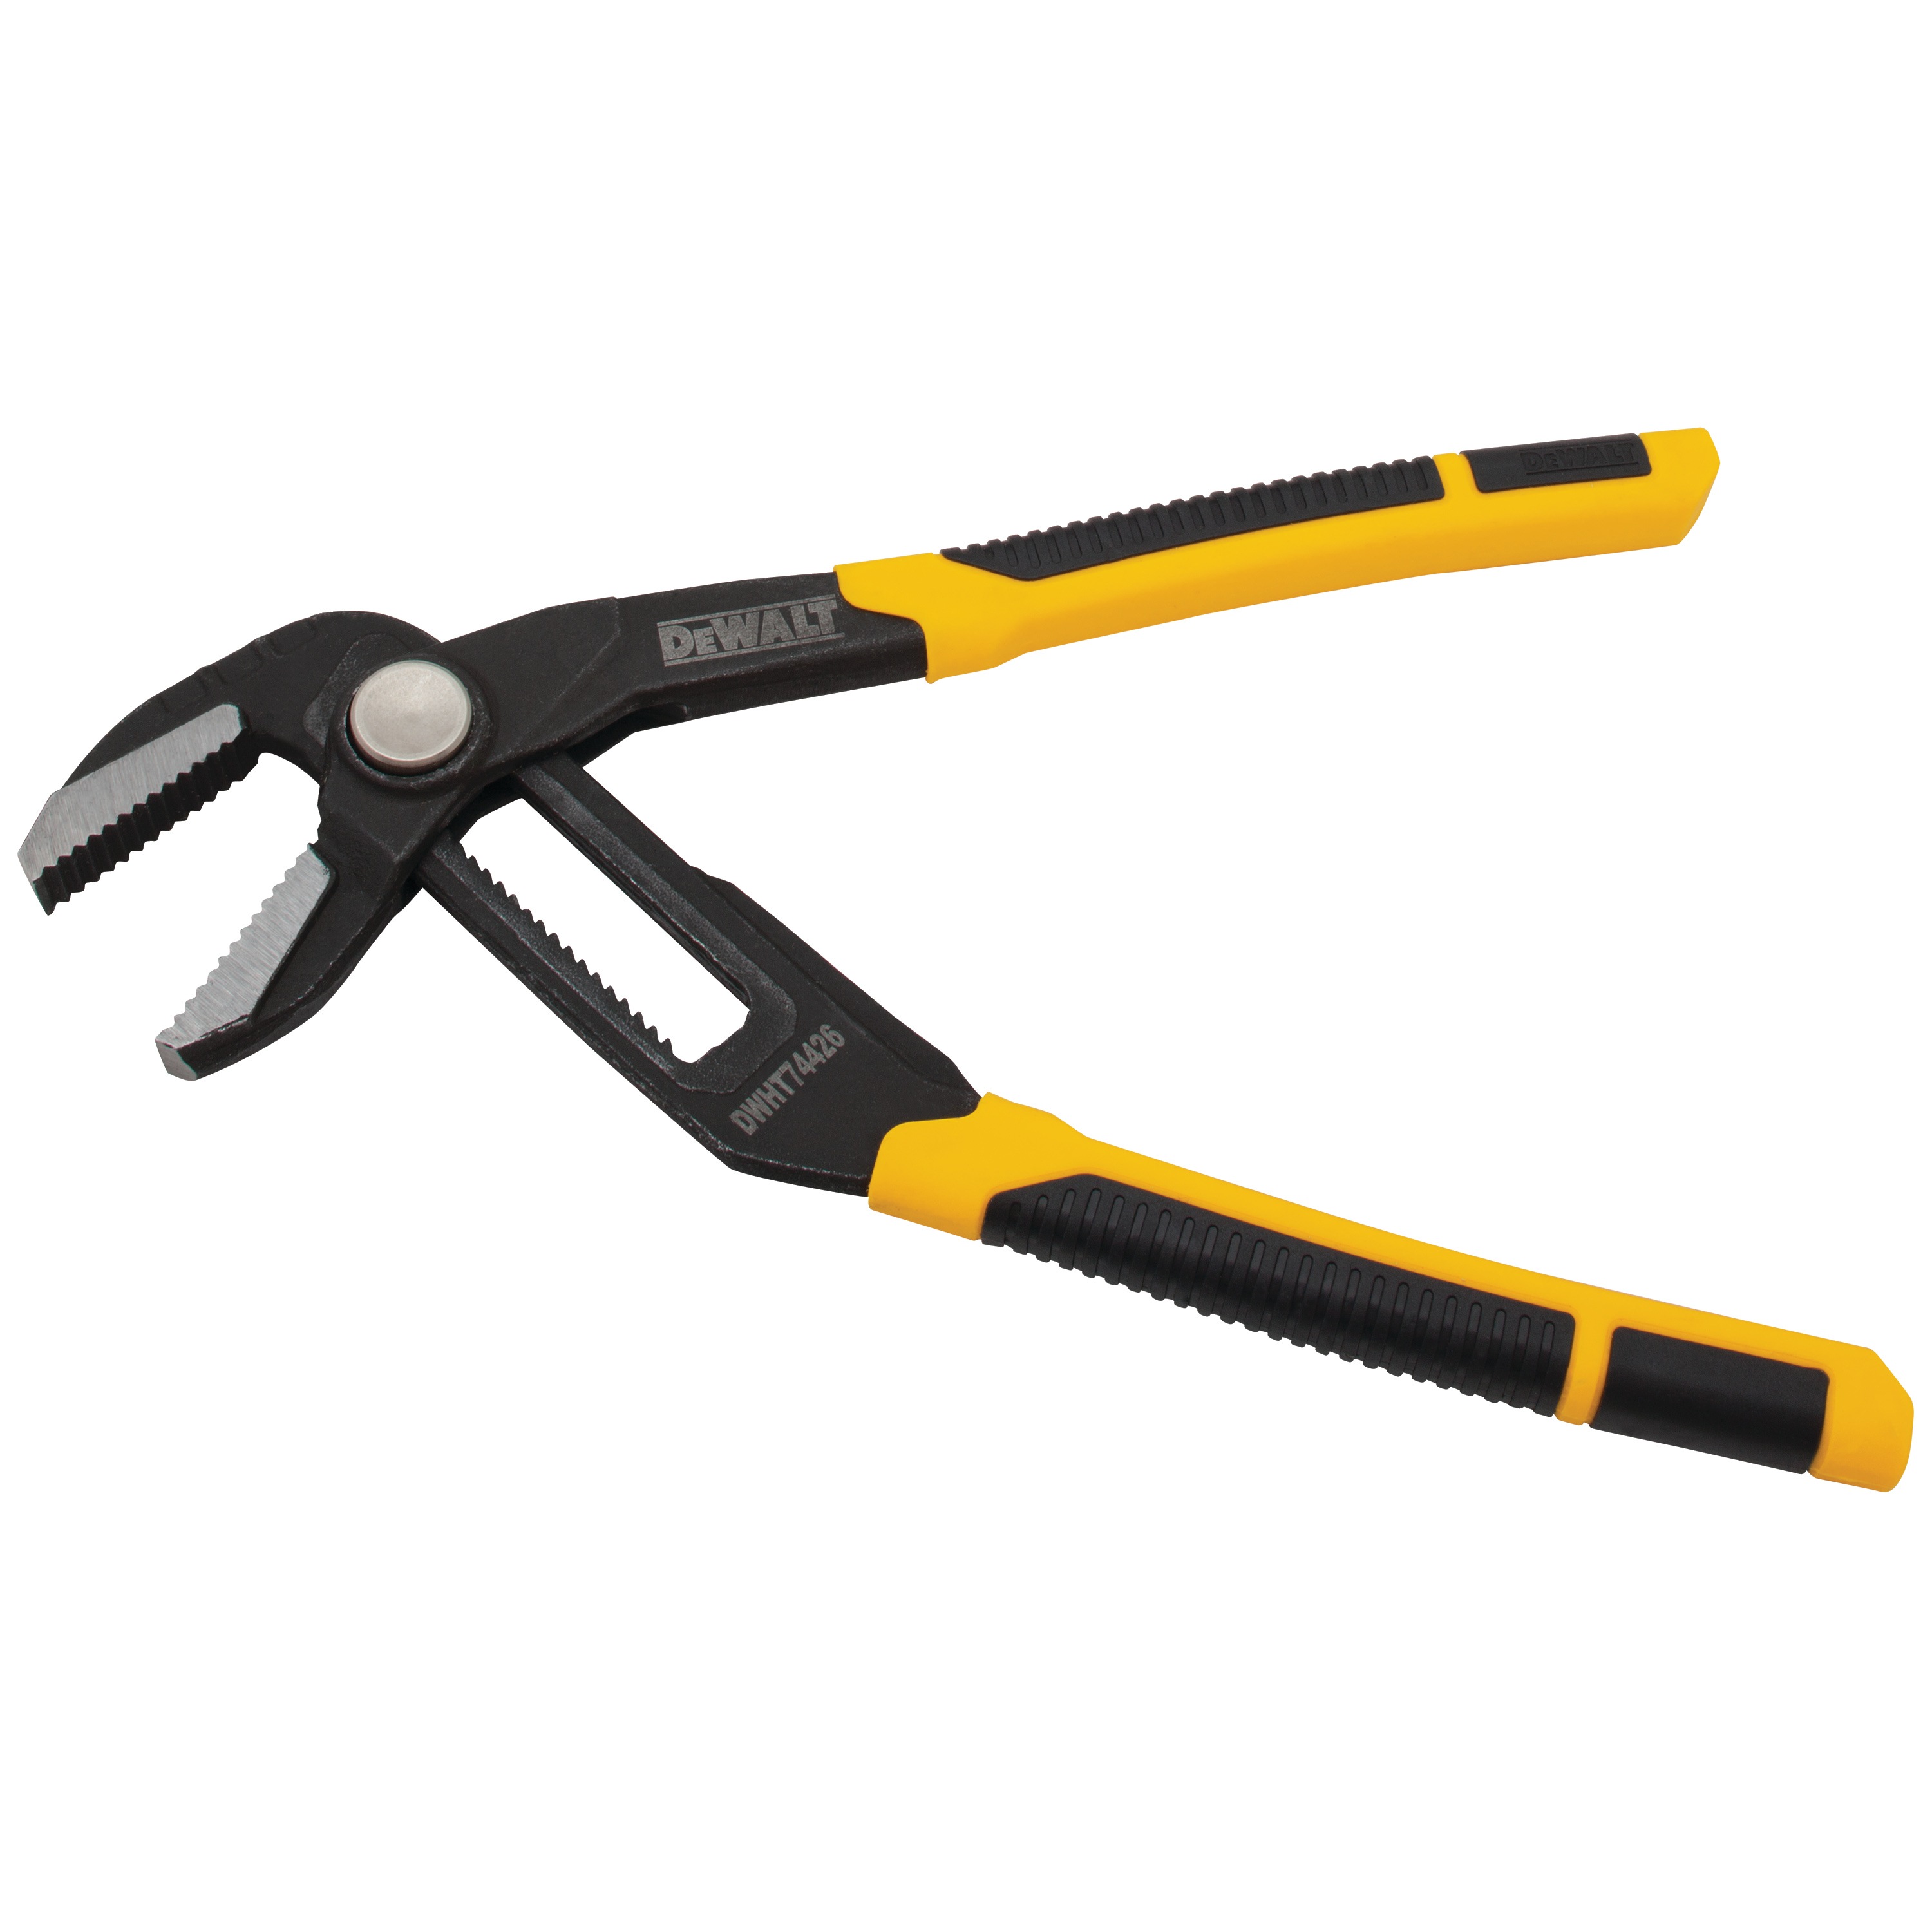 Profile of  opened 8 inch Straight Jaw Pushlock Pliers.